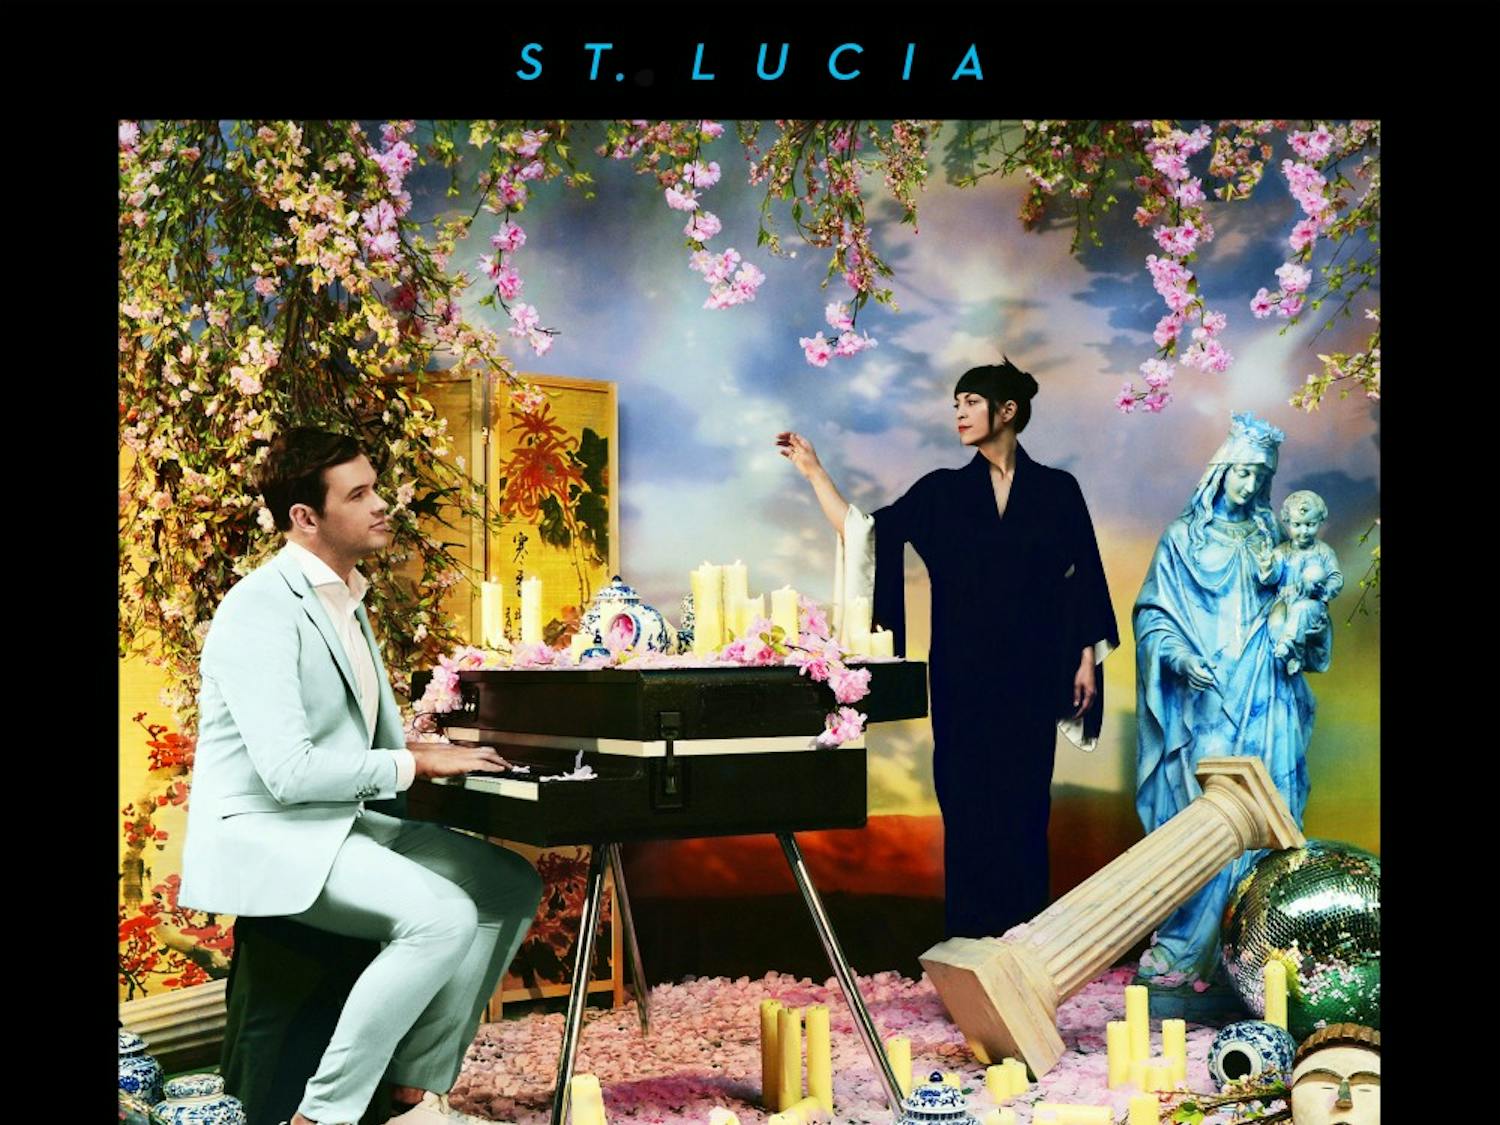 St. Lucia is touring to support their most recent album Hyperion, which was just released two weeks ago.